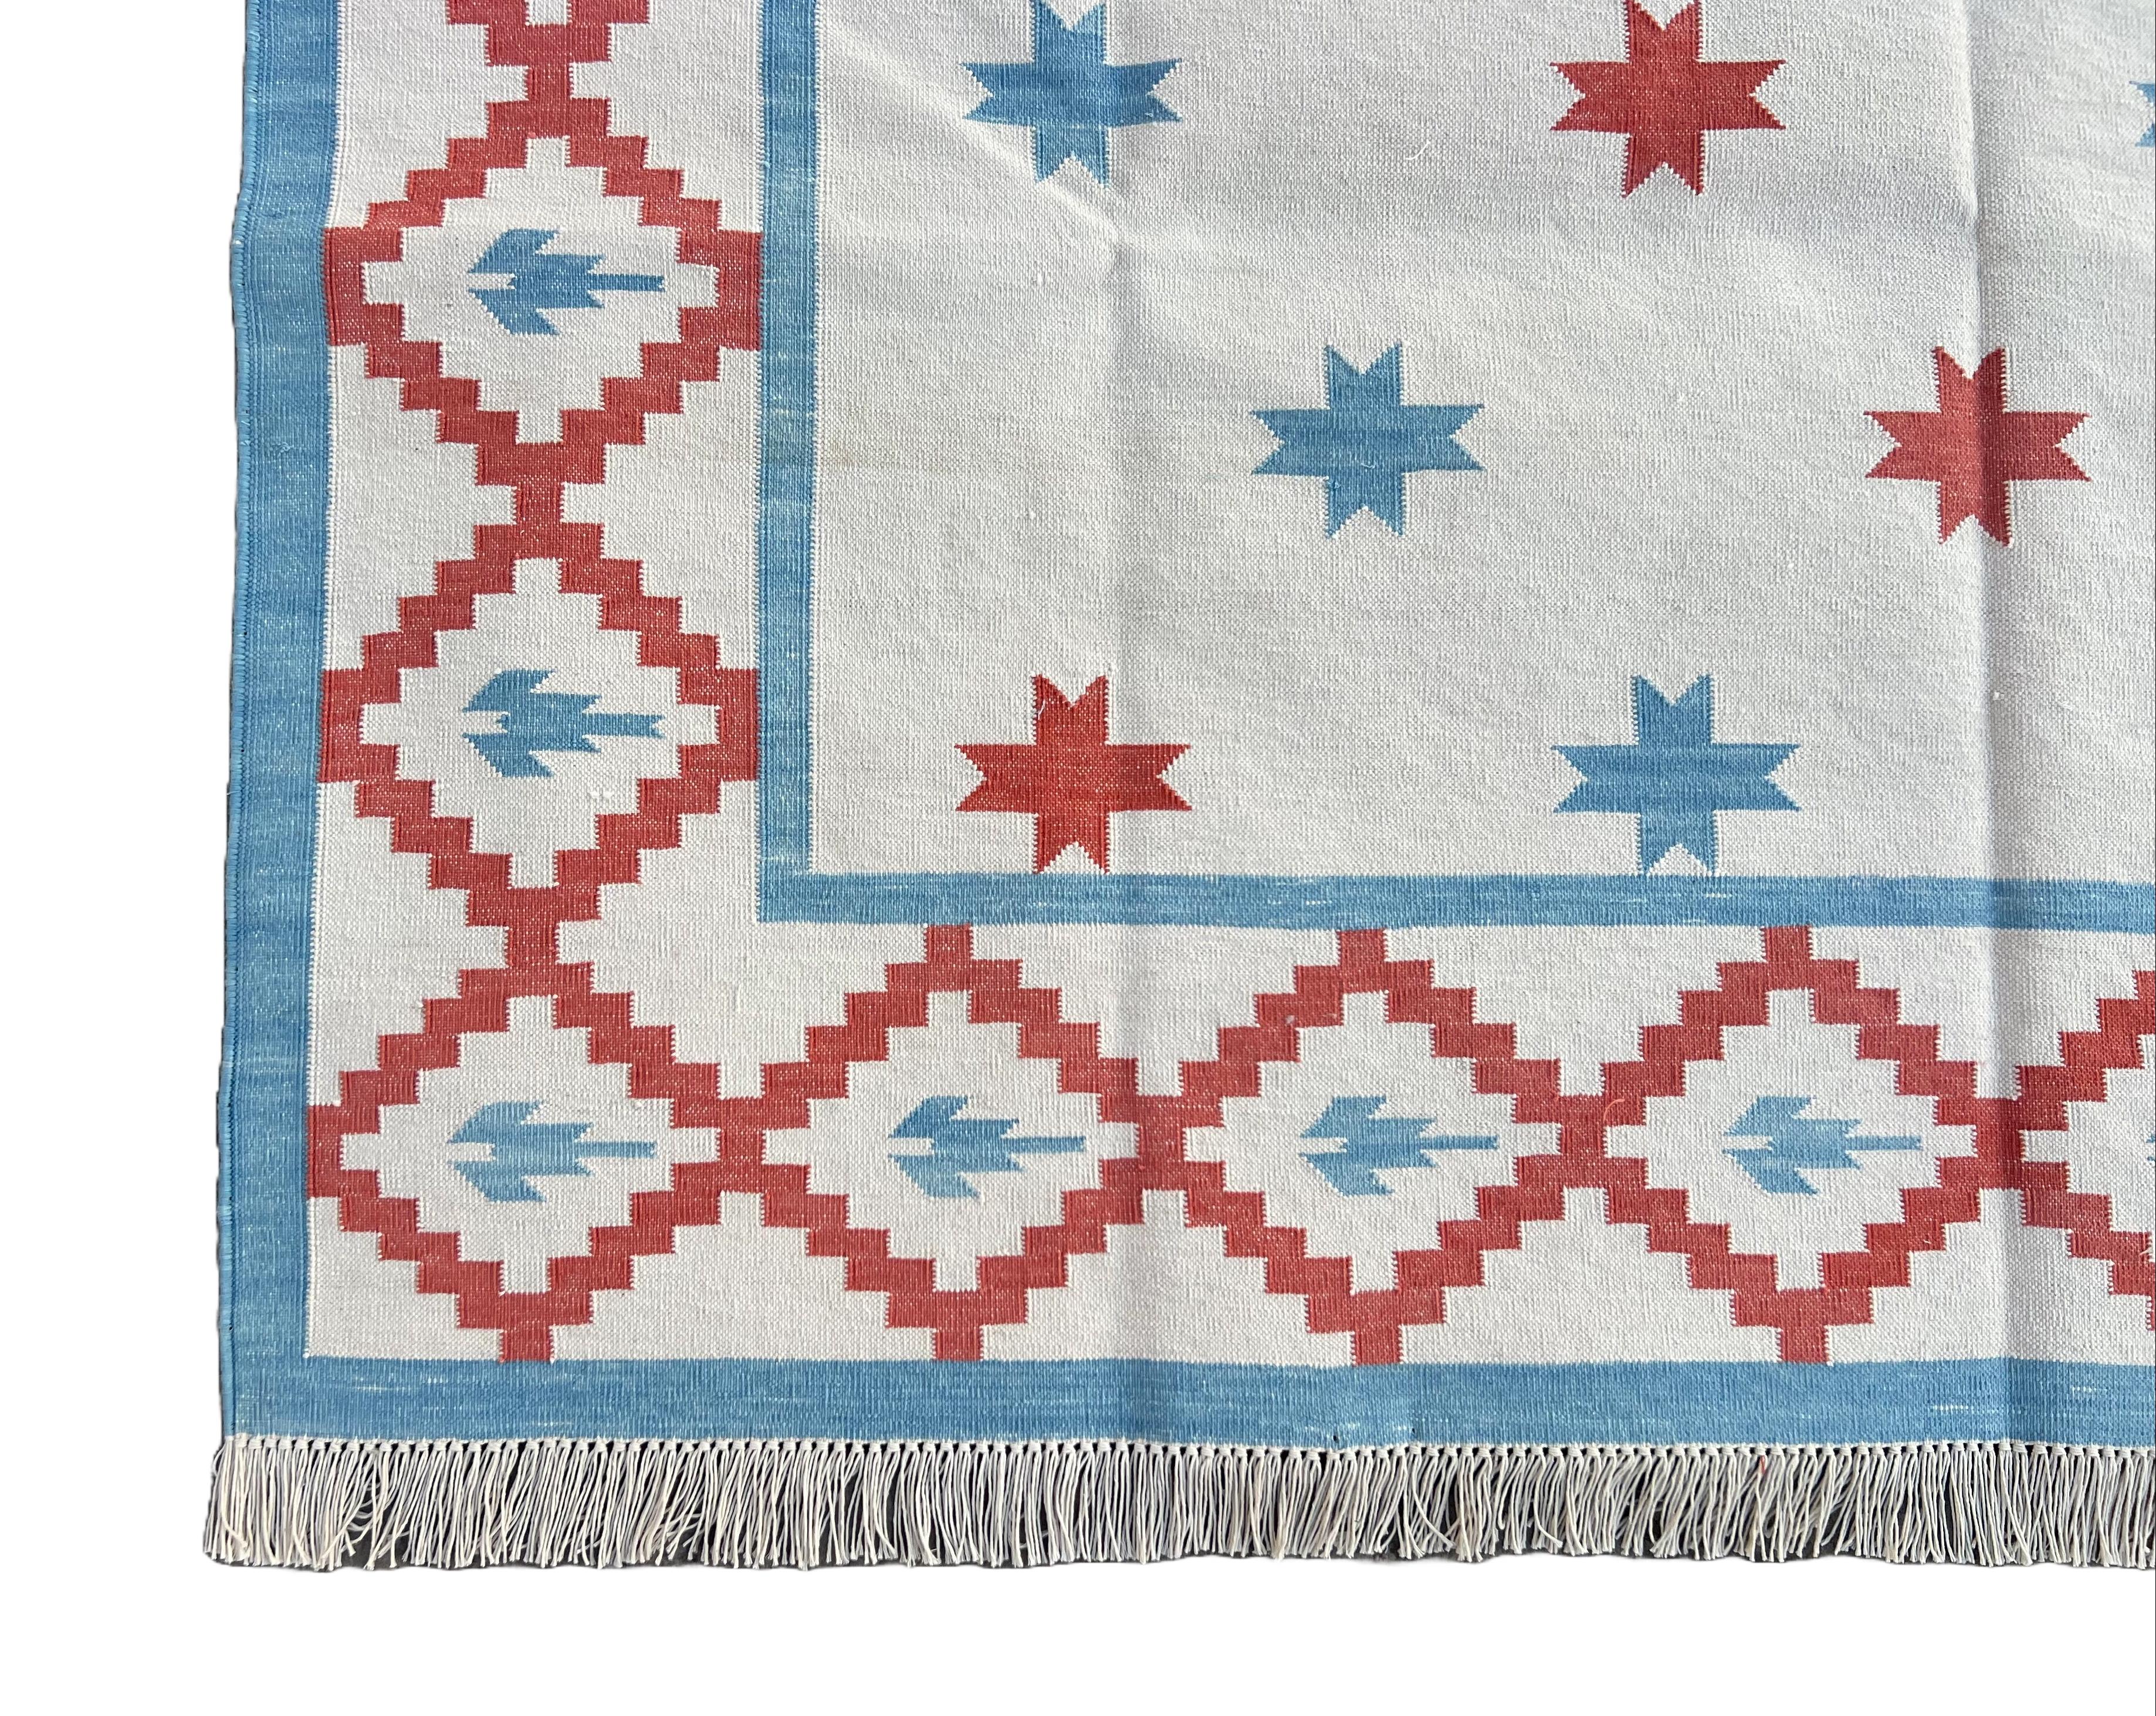 Hand-Woven Handmade Cotton Area Flat Weave Rug, 5x7 Cream And Blue Star Indian Dhurrie Rug For Sale